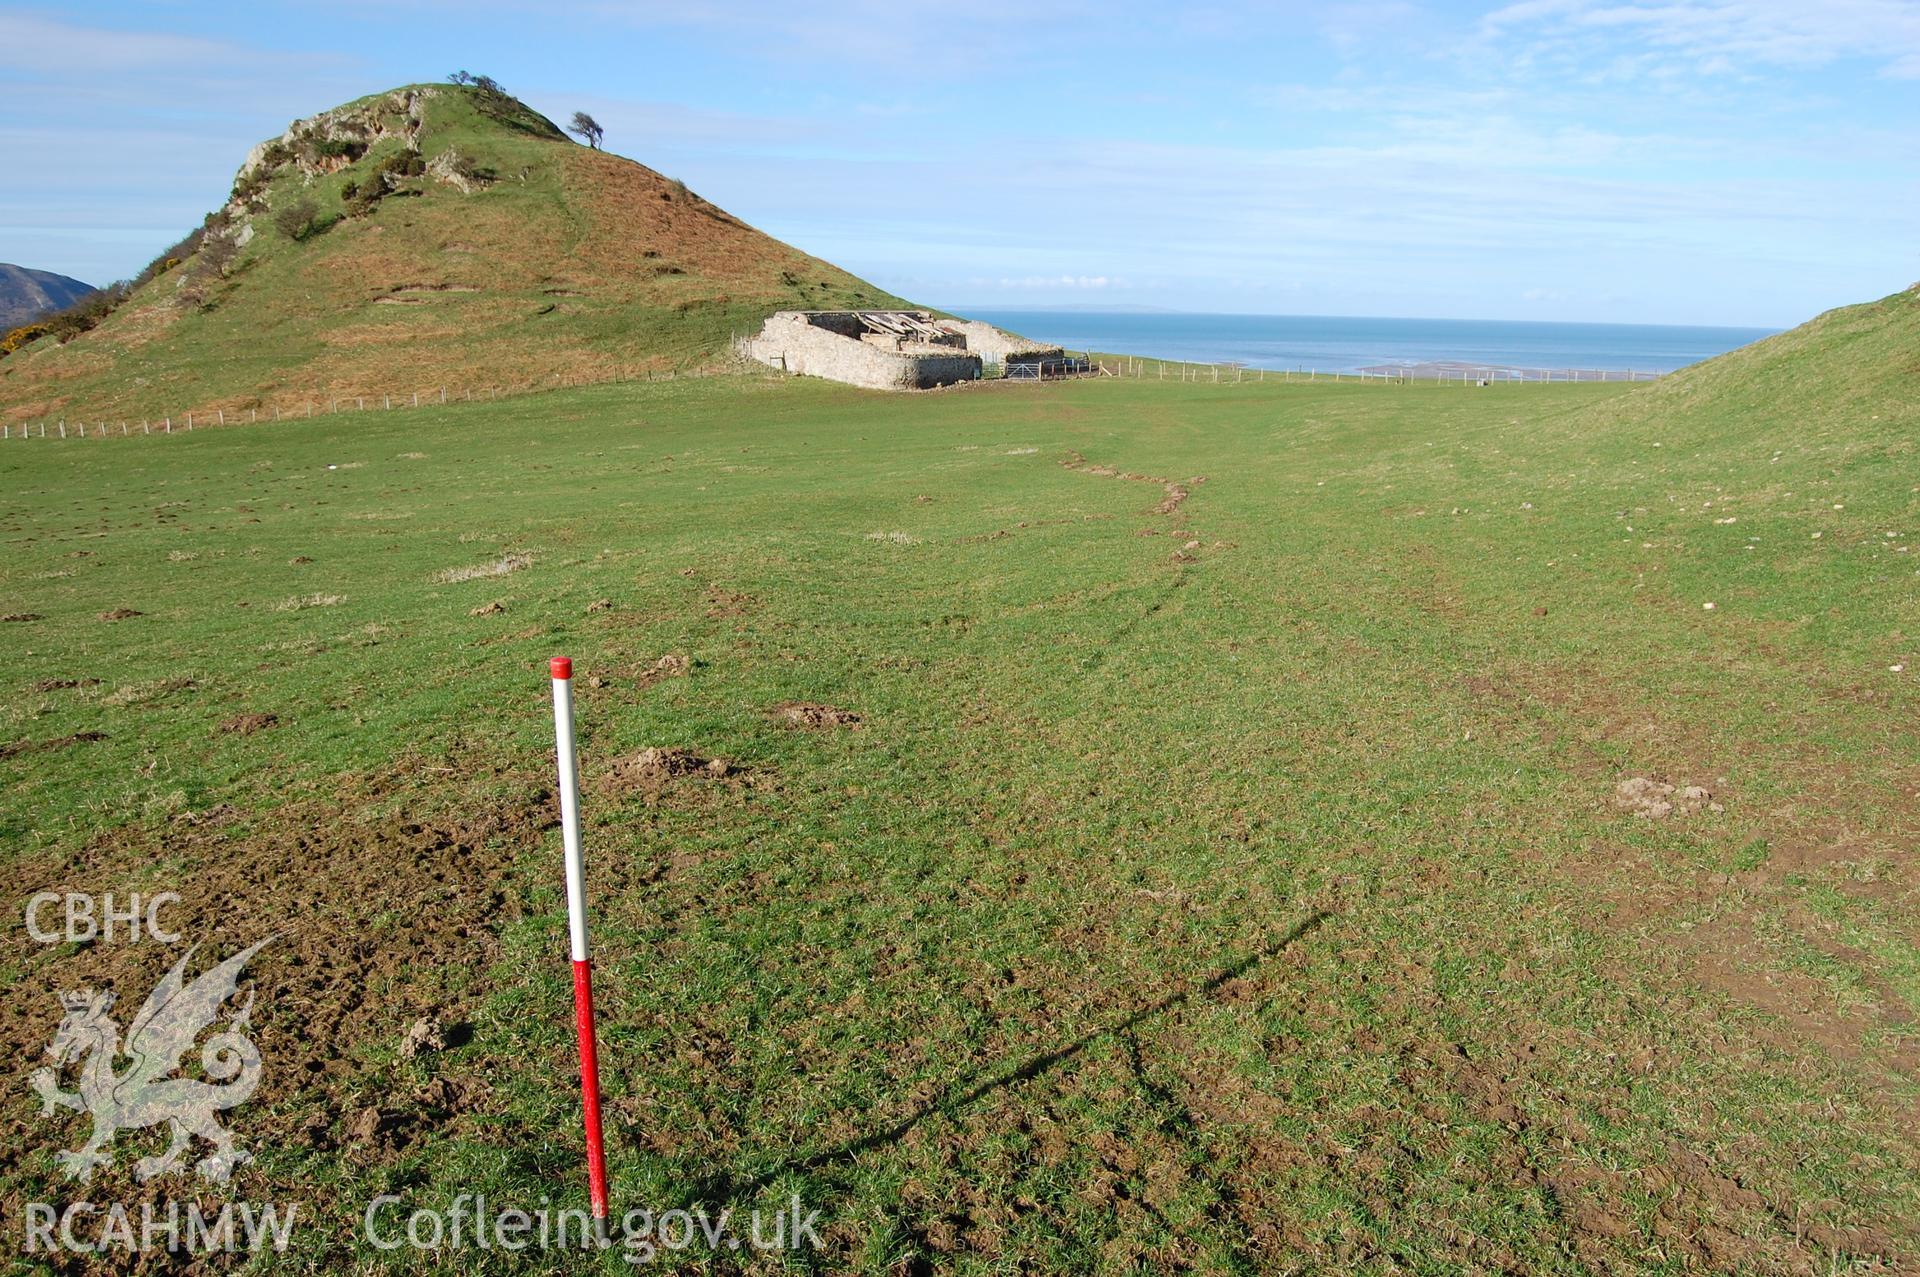 Digital photograph from an archaeological assessment of Deganwy Castle, carried out by Gwynedd Archaeological Trust, 2009. Looking up hollow-way towards castle.